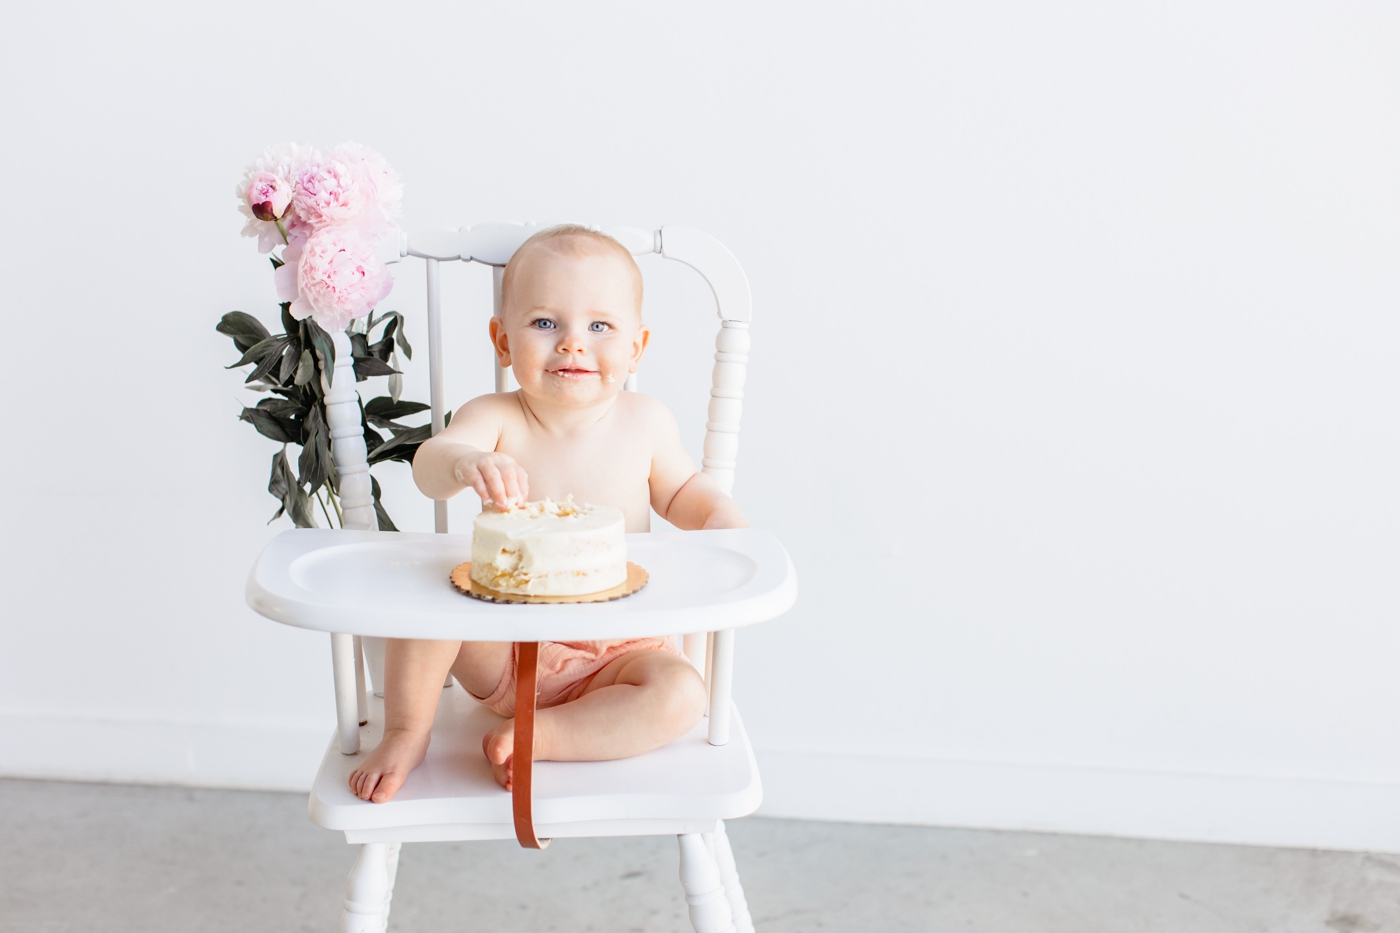 Smiling baby during cake smash session. Photo by Sana Ahmed Photography.